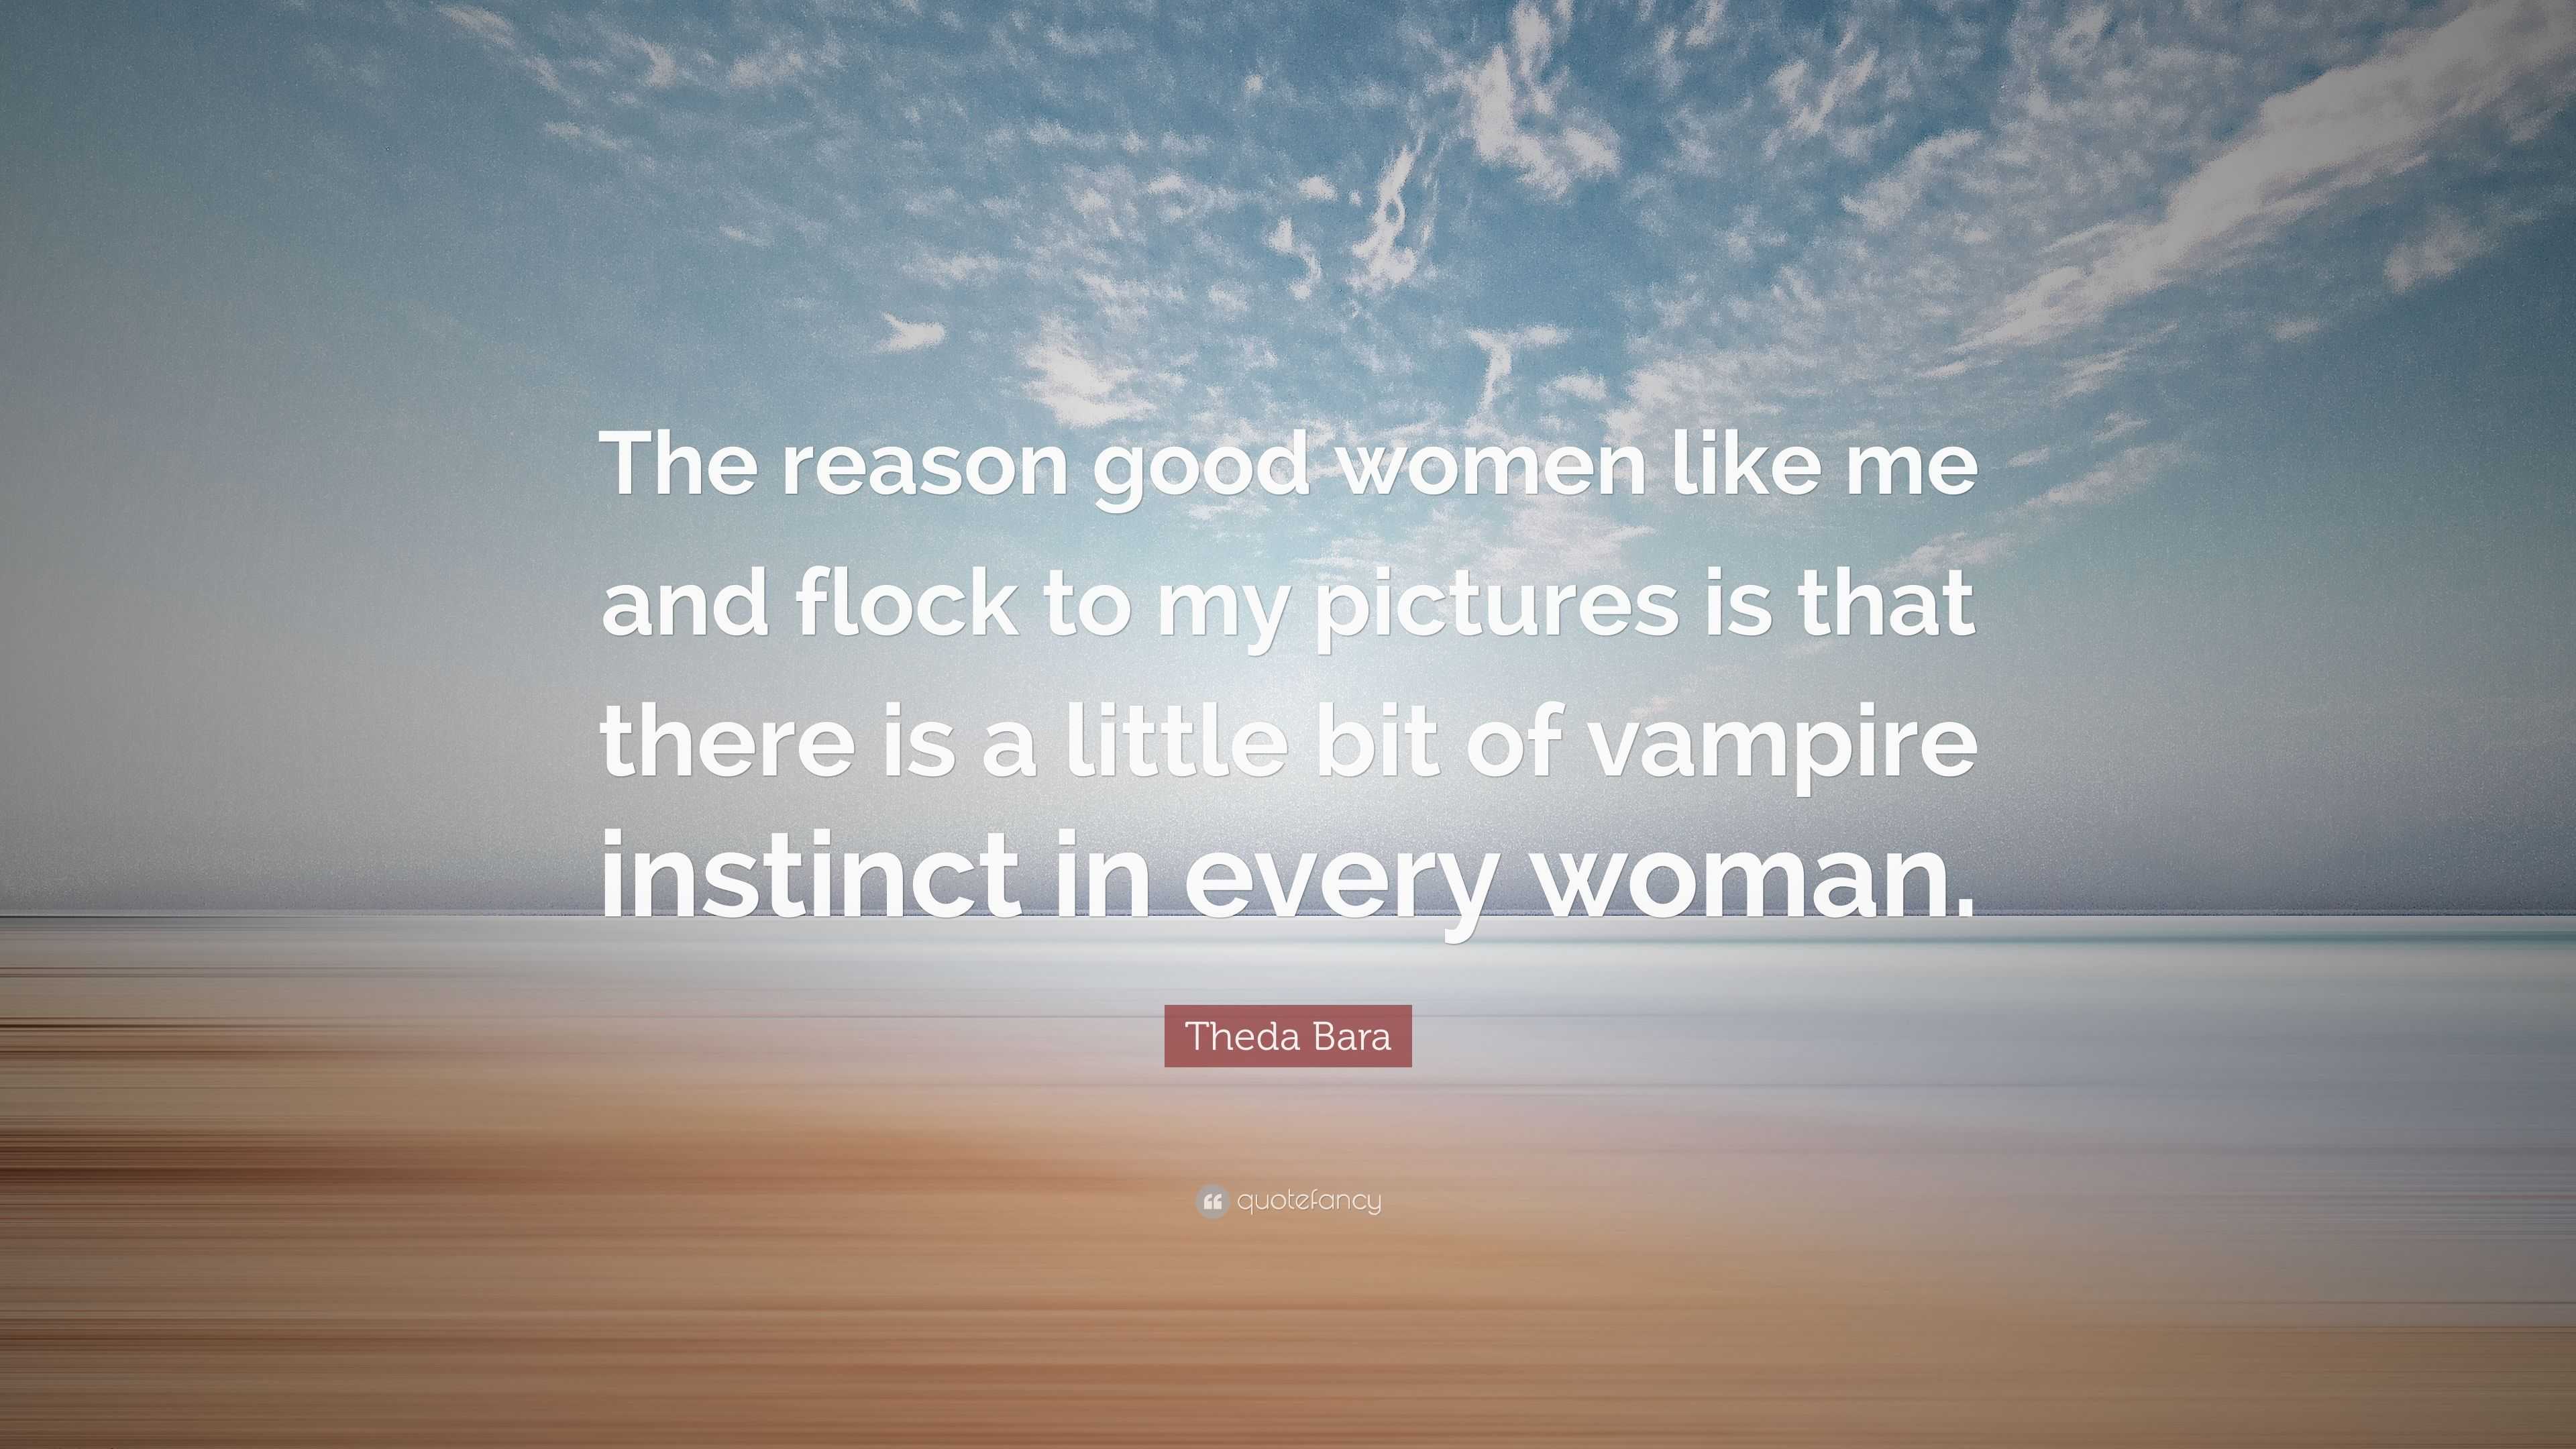 Theda Bara Quote: “The reason good women like me and flock to my ...